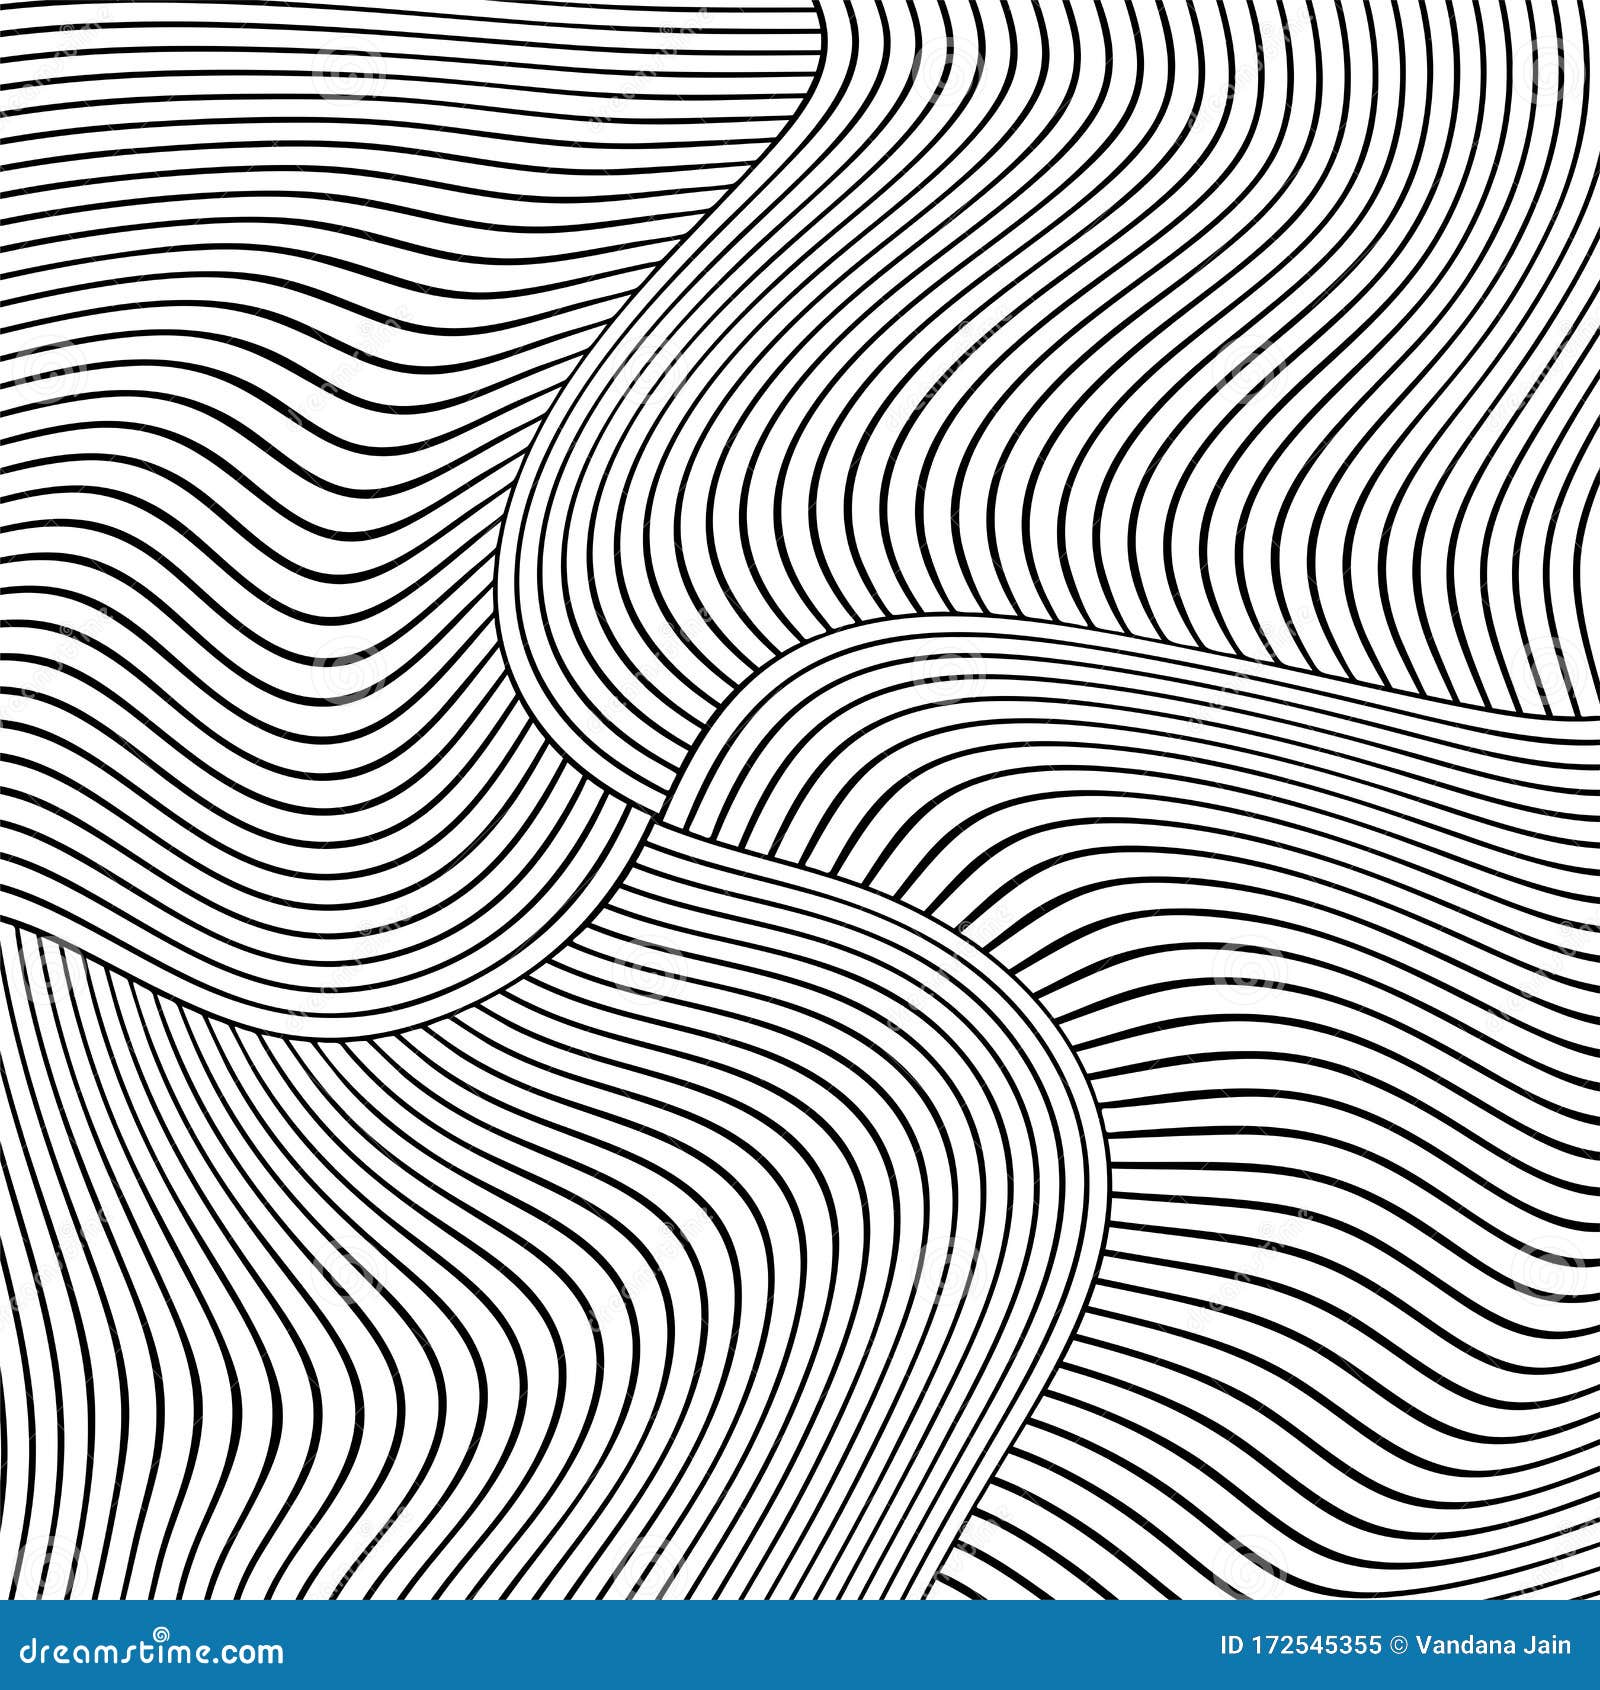 Vector Image Black and White Waves Striped Background.Optical Illusion ...